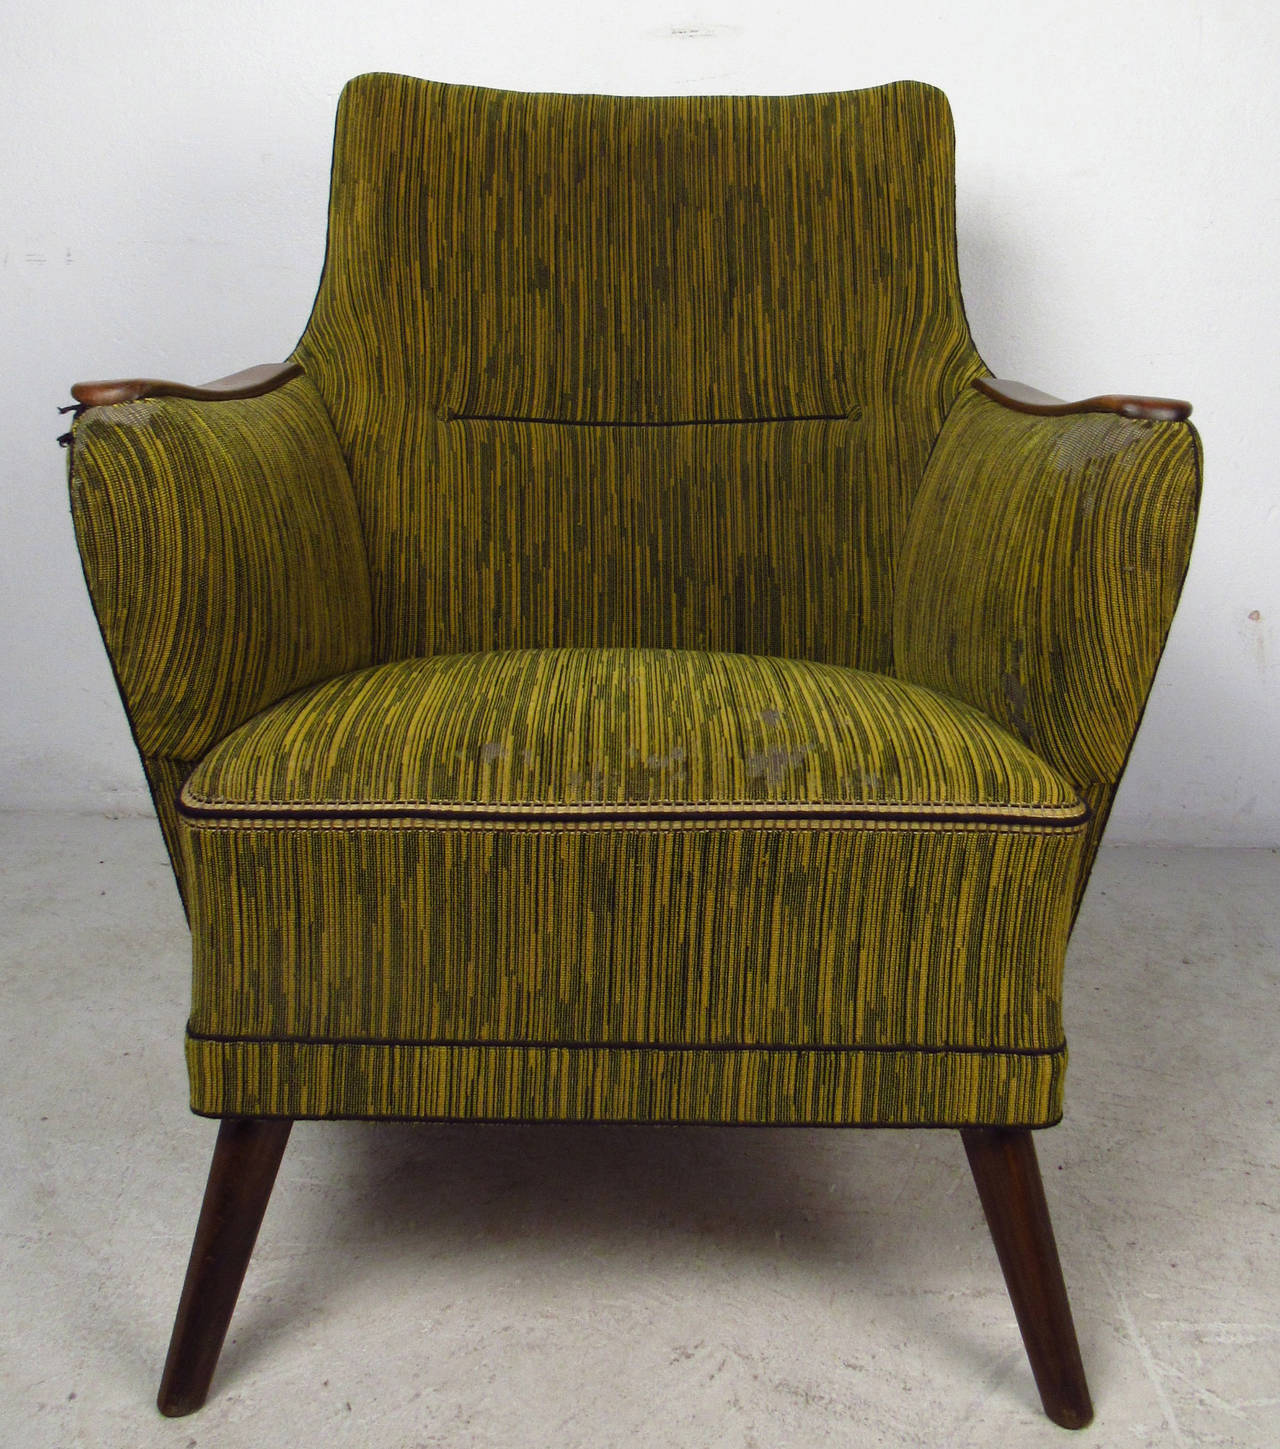 Vintage-modern sculpted Danish lounge chair, features striped upholstery, teak legs and armrests, designed in the manner of Mogens Lassen.

Please confirm item location NY or NJ with dealer.